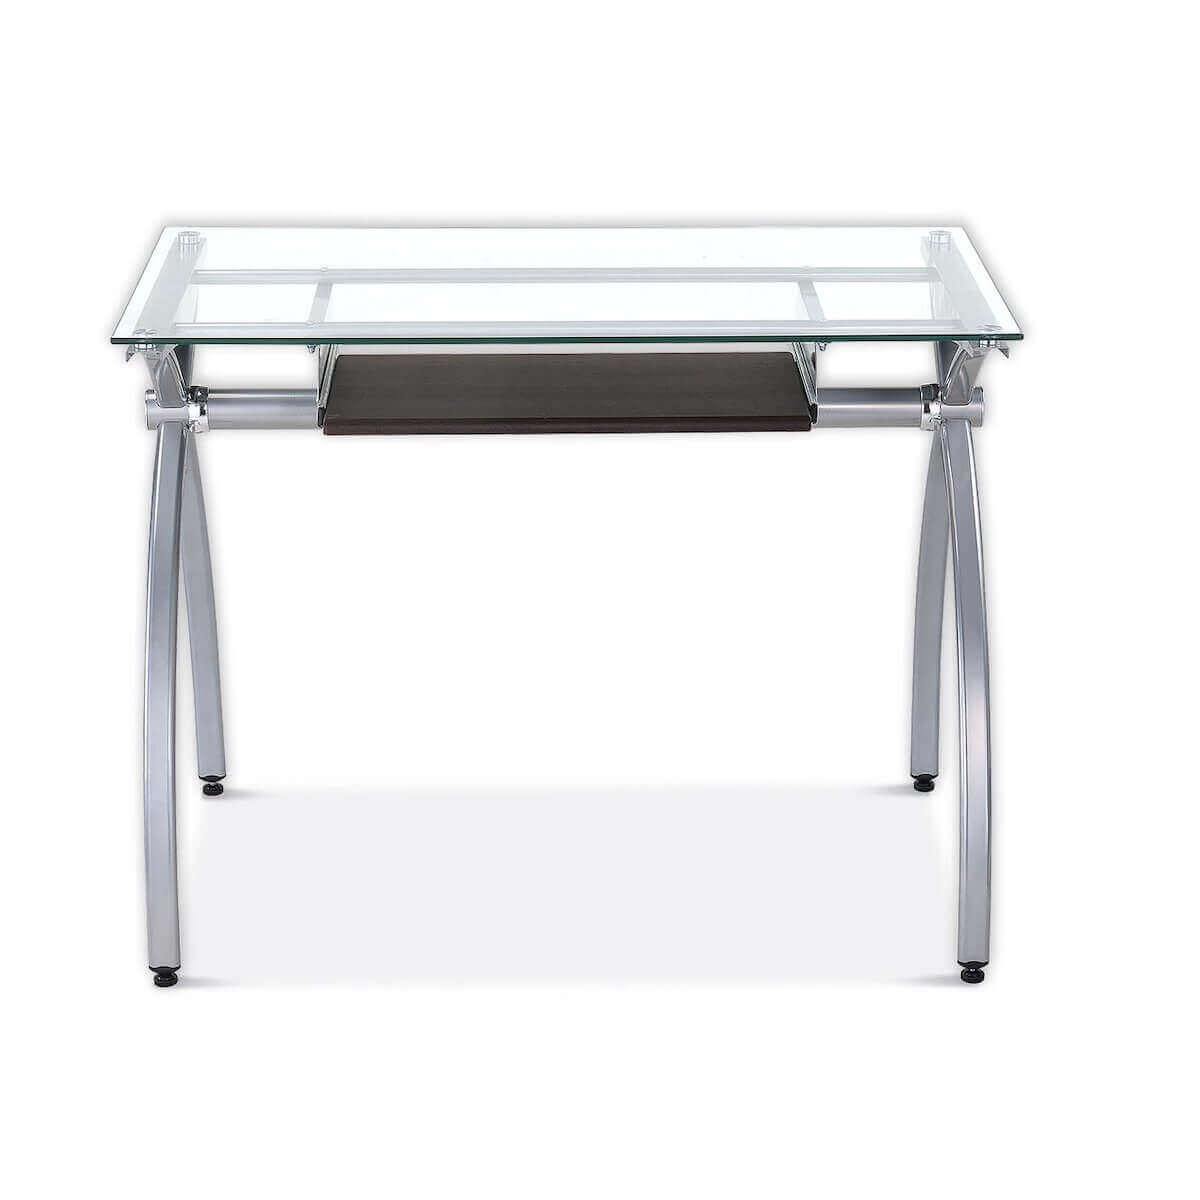 Techni Mobili Contempo Clear Glass Top Computer Desk with Pull Out Keyboard Panel RTA-00397B-GLS